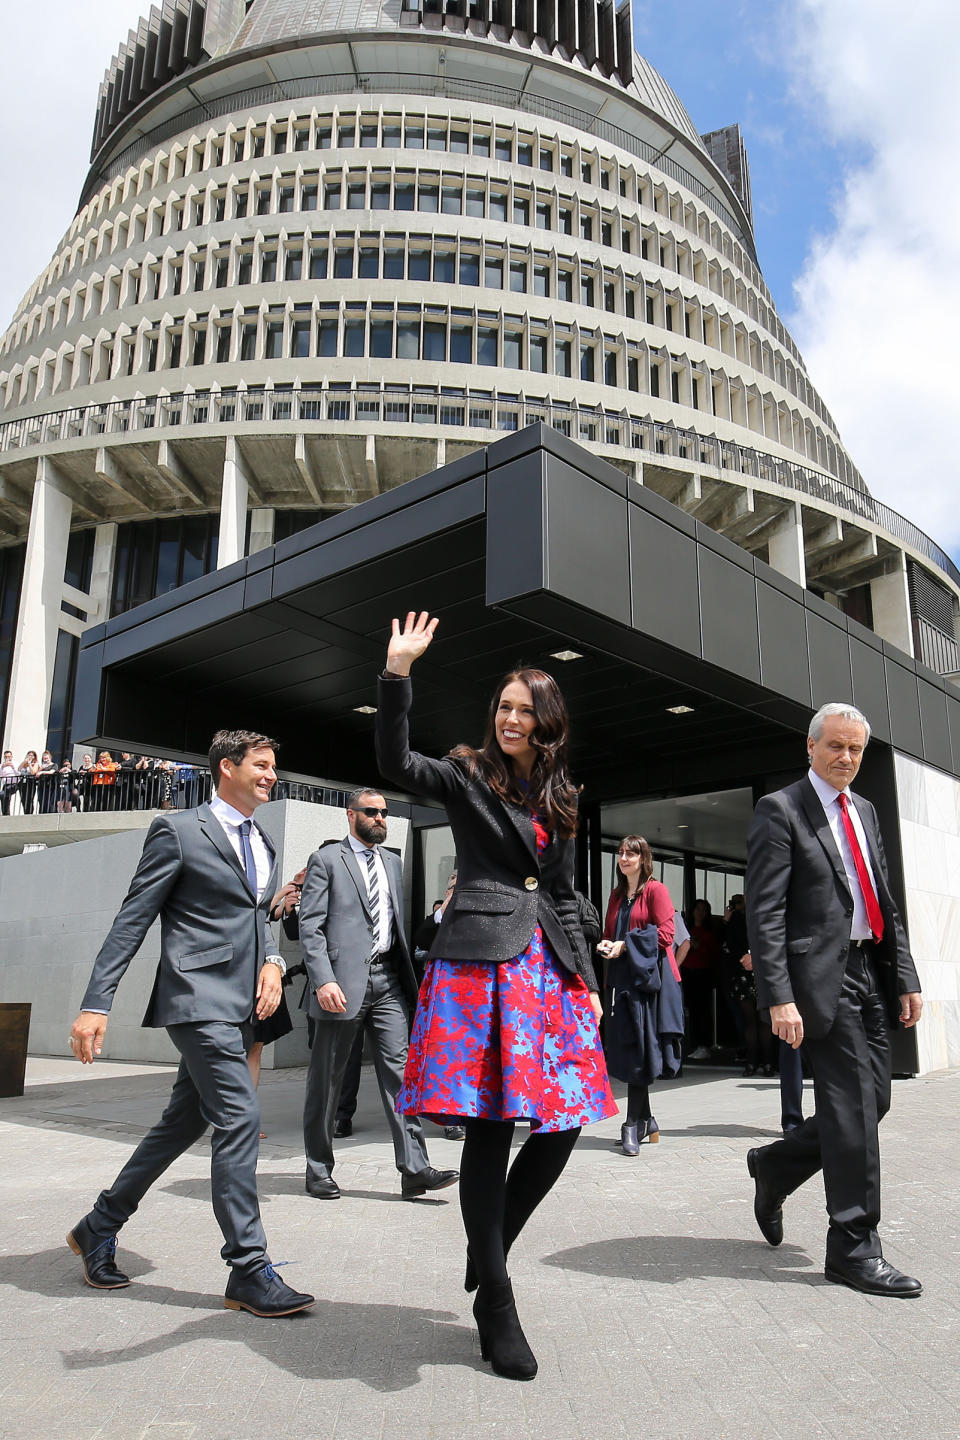 Prime Minister Jacinda Ardern and partner Clarke Gayford arrive at Parliament after a swearing-in ceremony at Government House in Wellington on Oct. 26, 2017.